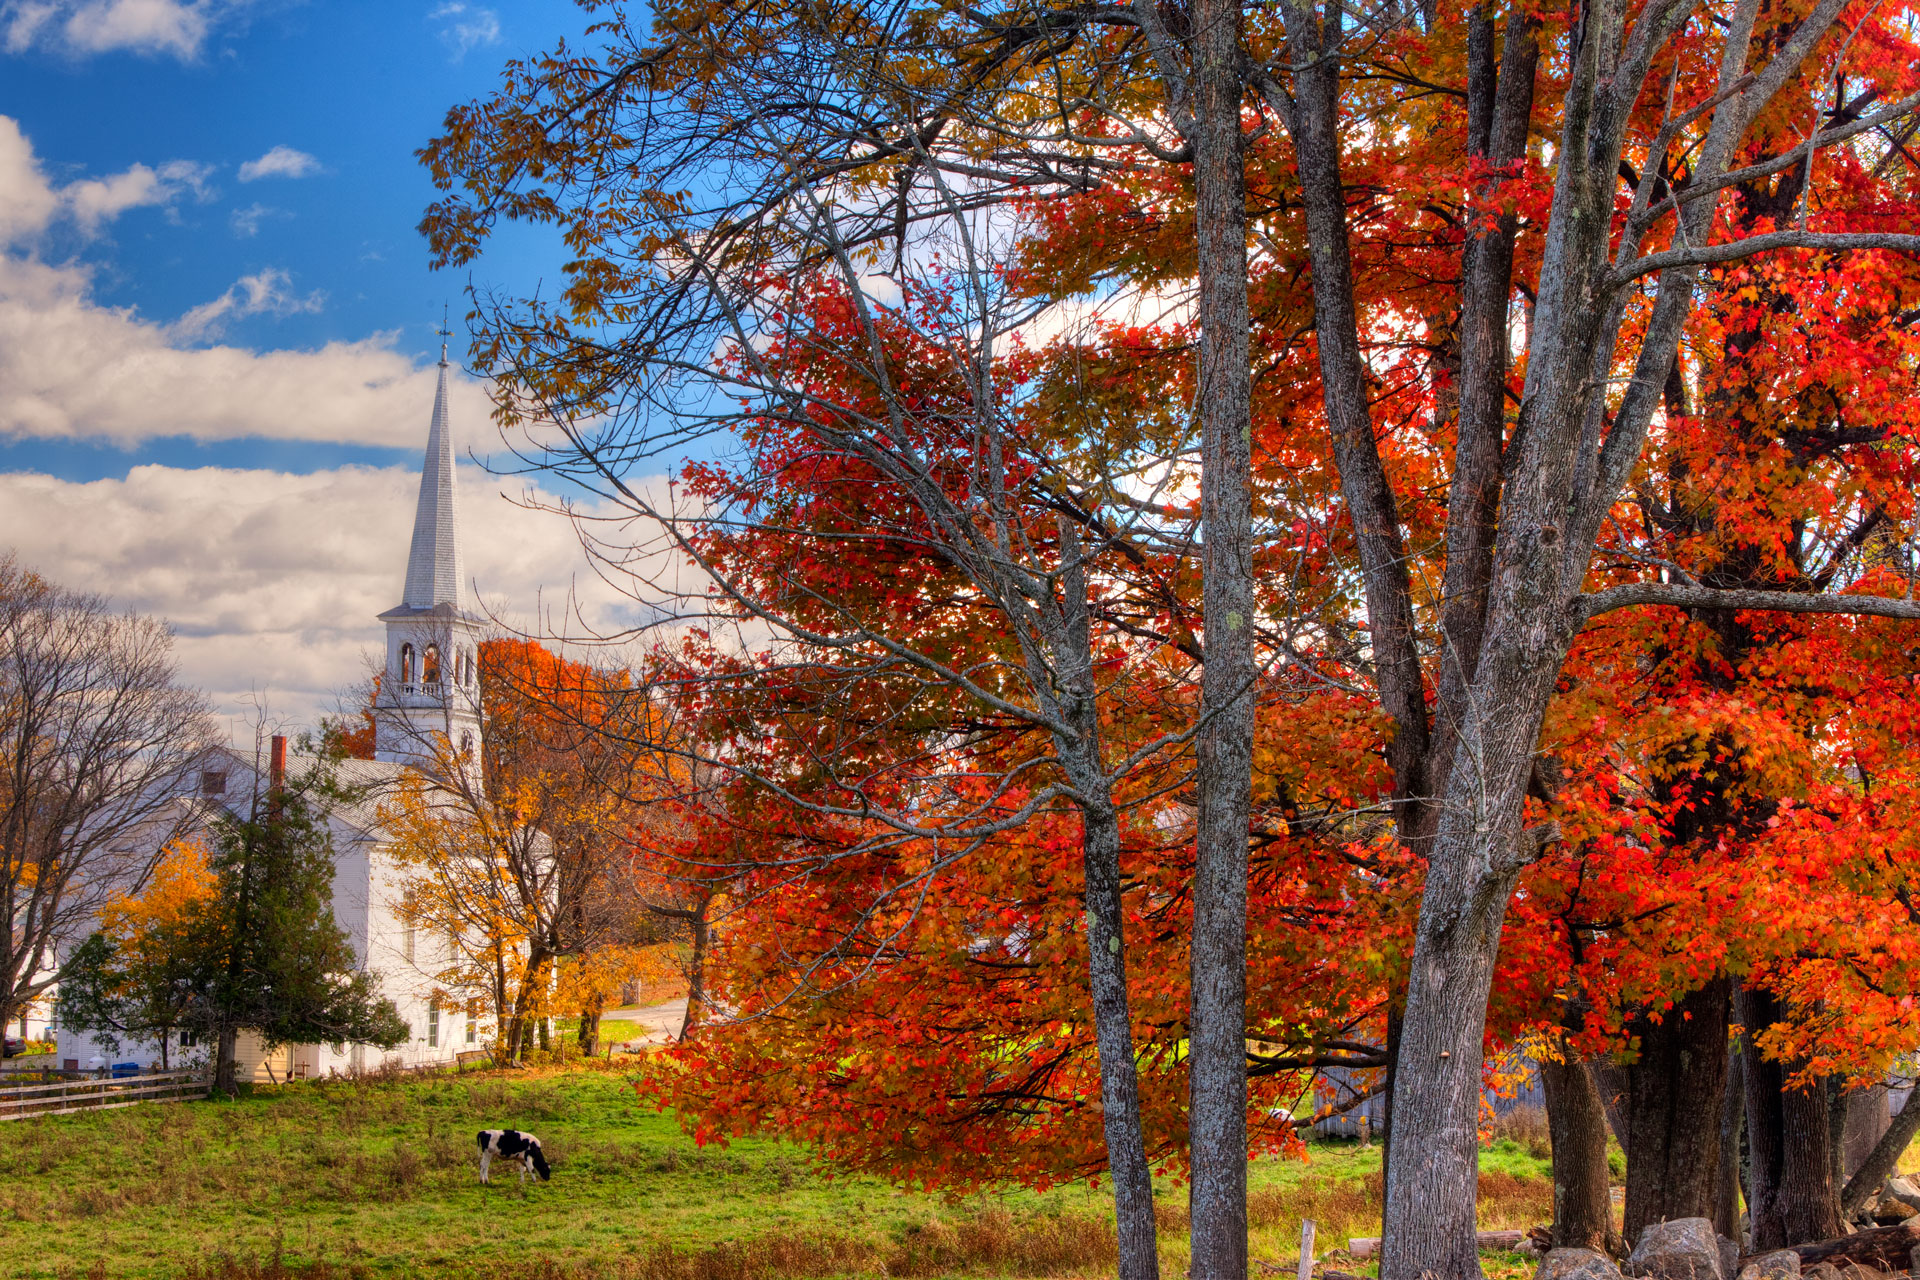 Top 5 Autumn Destinations - Get Ready for A Perfect Vacation!